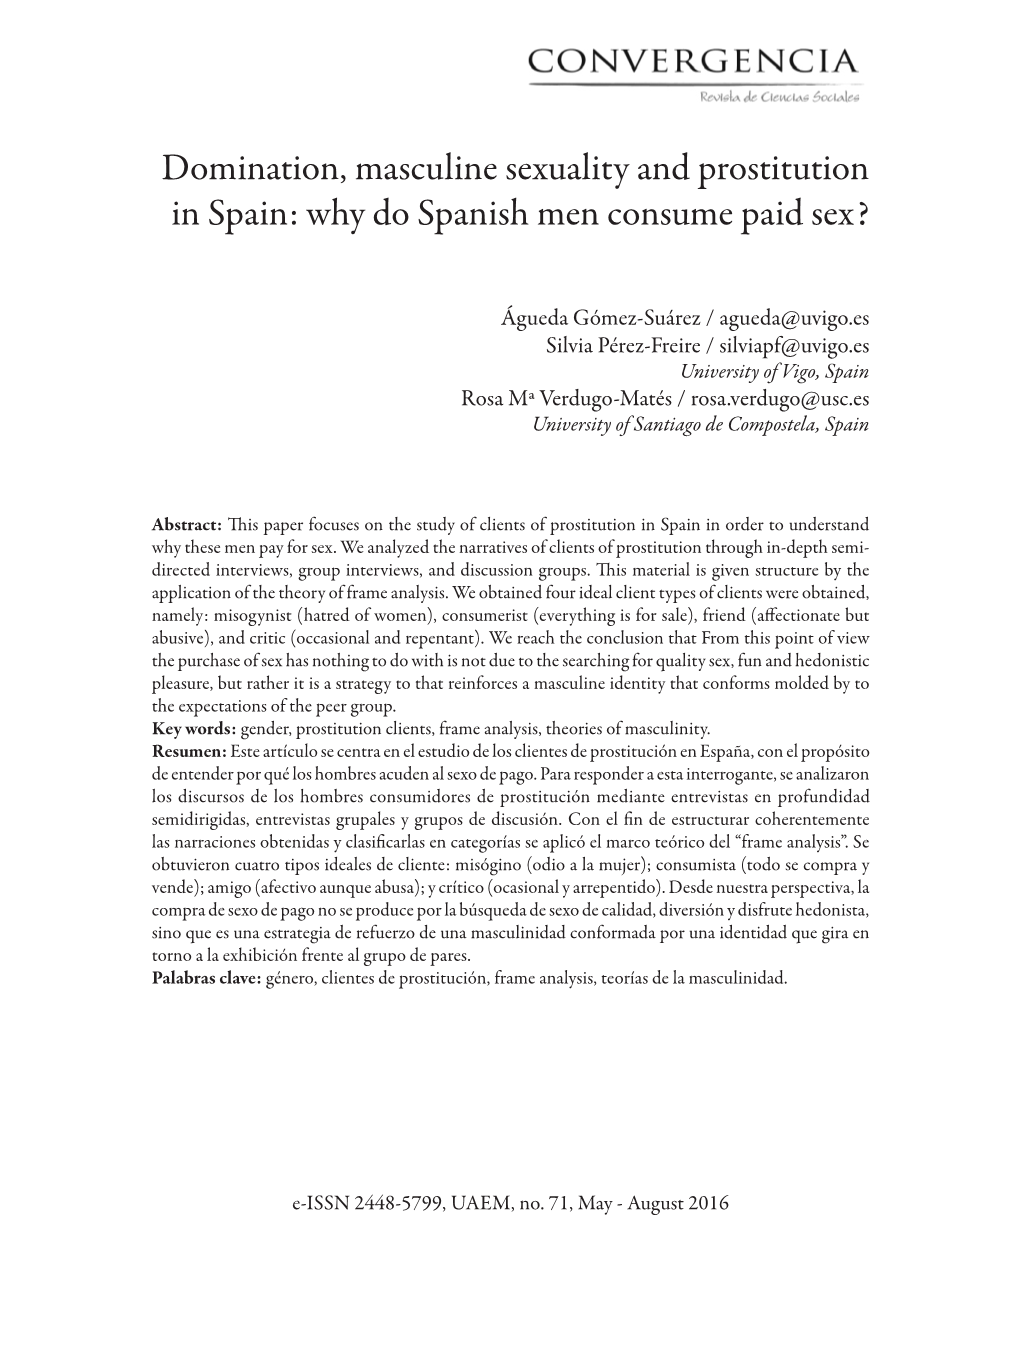 Domination, Masculine Sexuality and Prostitution in Spain: Why Do Spanish Men Consume Paid Sex?